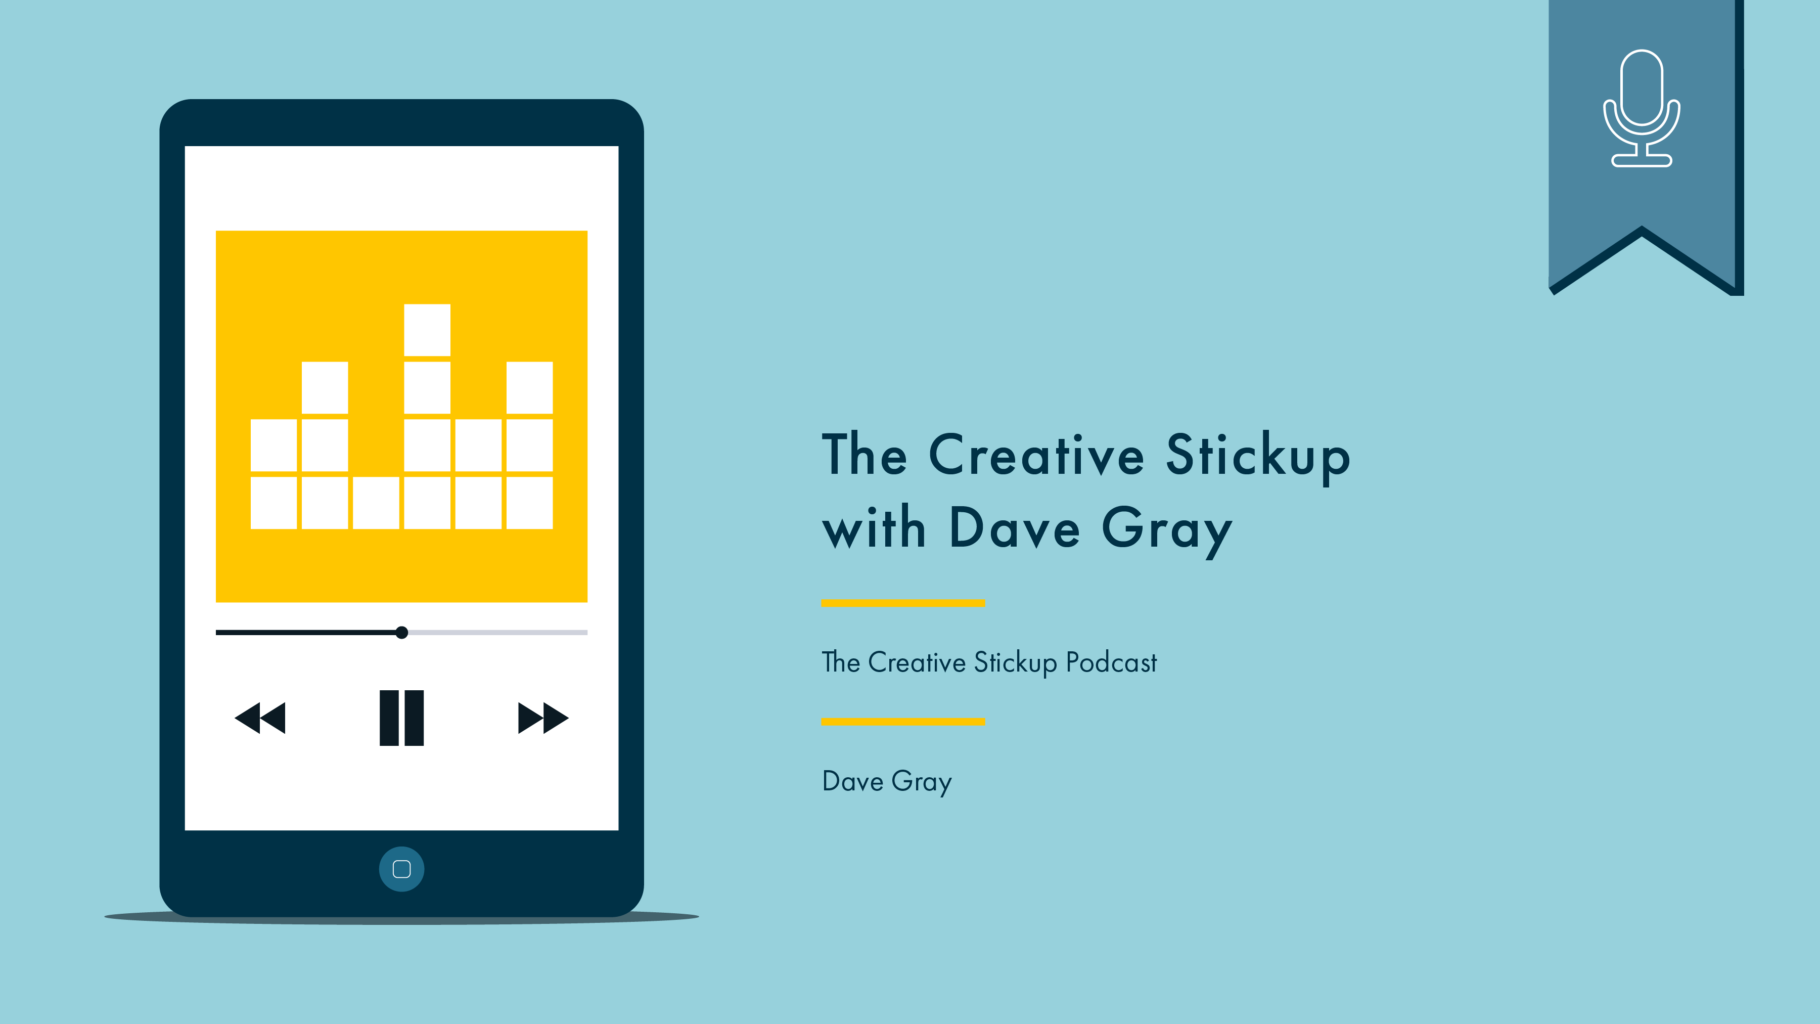 Phone with podcast artwork on the left. On the right reads “The Creative Stickup with Dave Gray, The Creative Stickup Podcast, Dave Gray.” Above is a blue flag with a white icon denoting that this is a podcast.